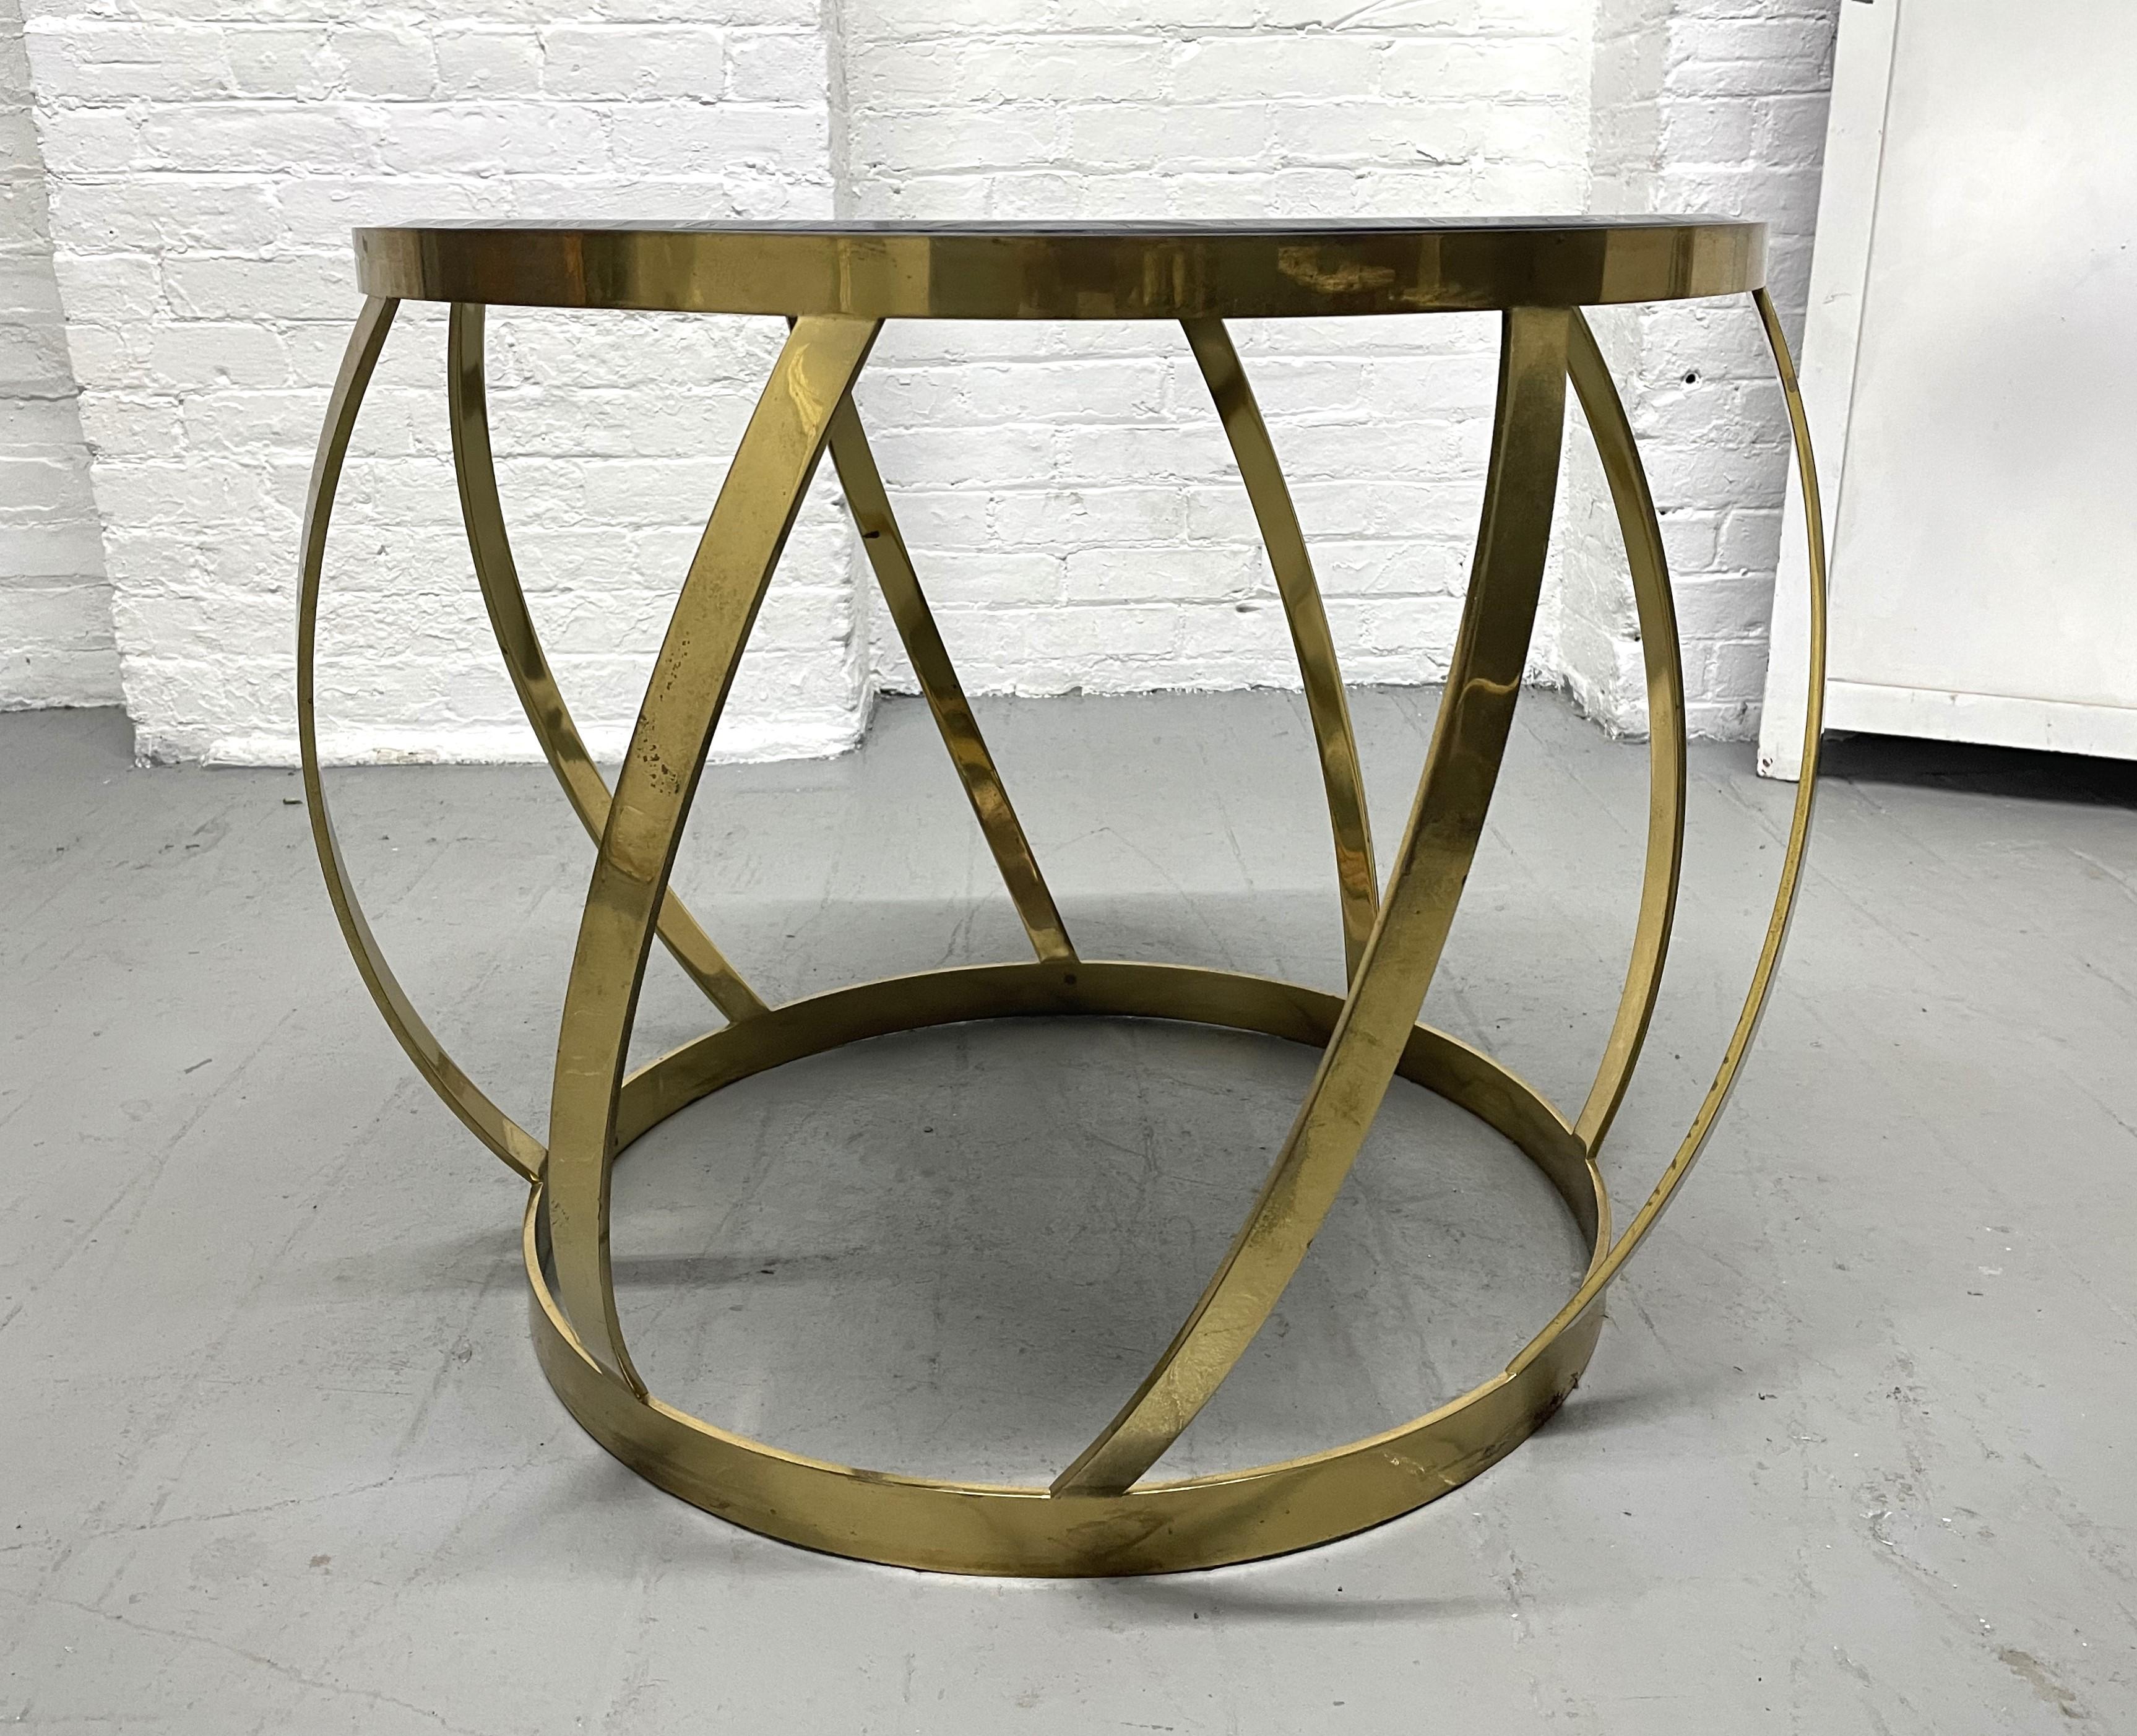 Rare oval onyx brass side table by Karl Springer. Heavy brass table with an onyx beveled insert top.